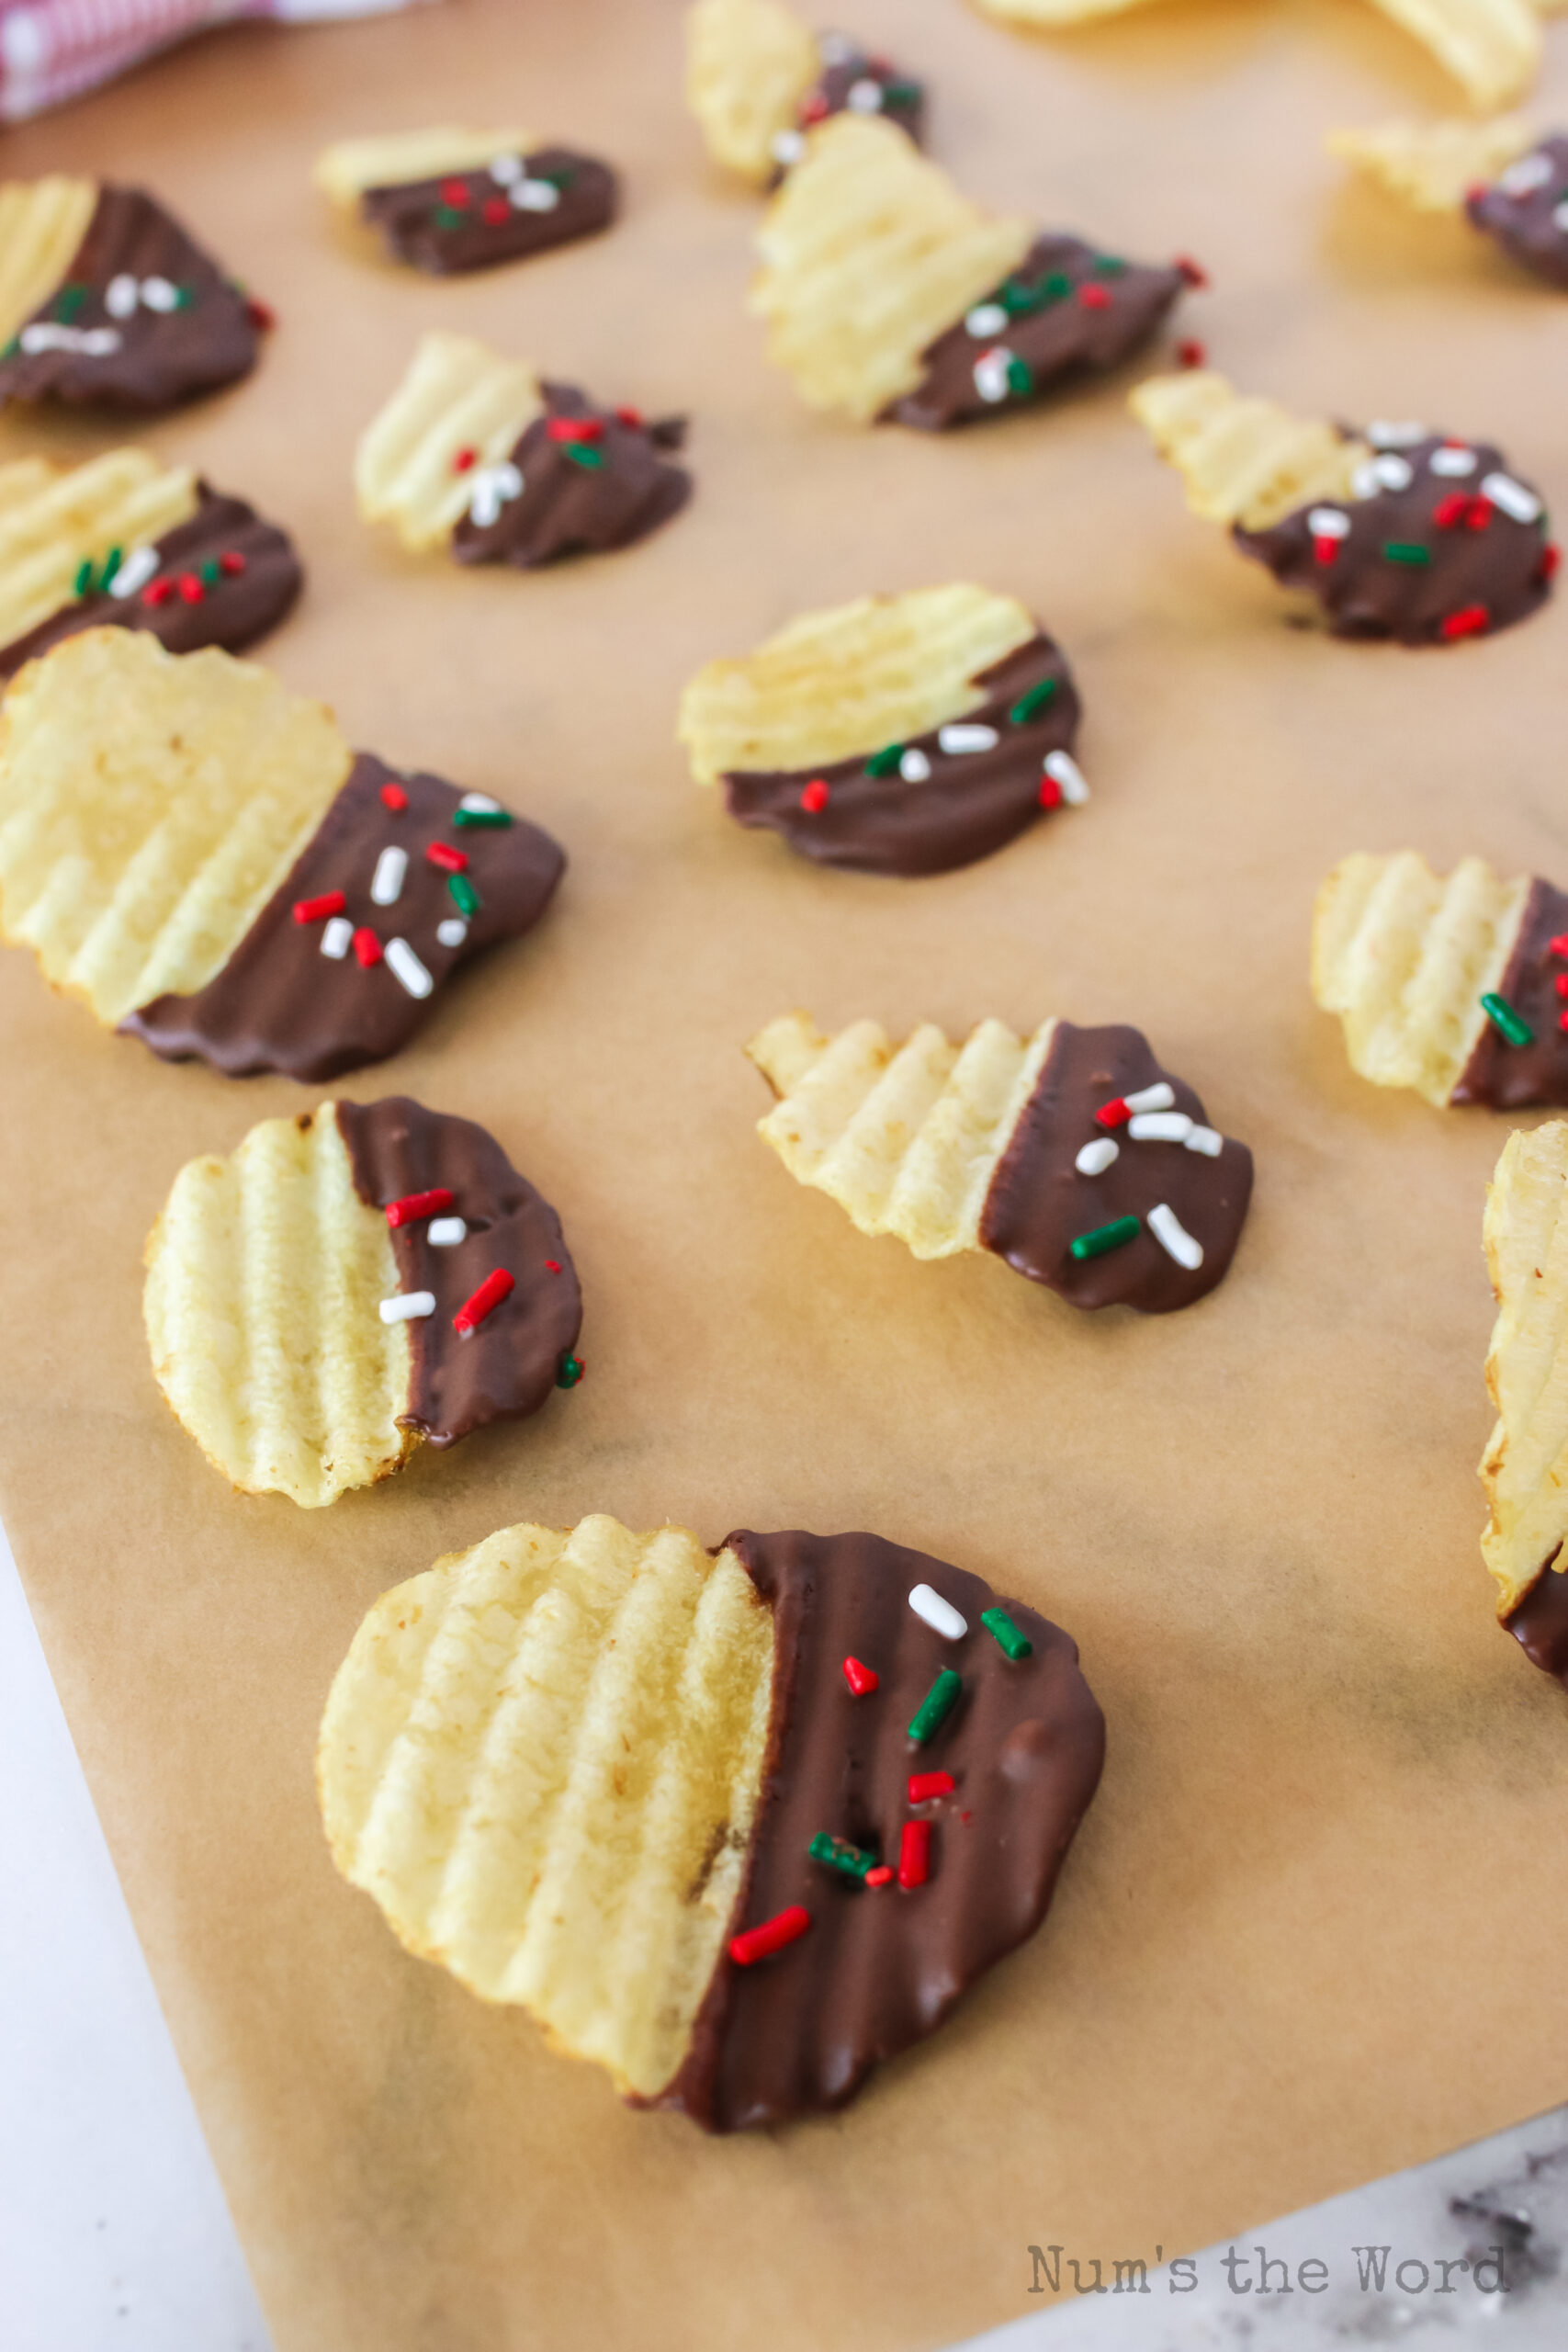 chocolate potato chips dipped with red and green sprinkles on parchment paper.